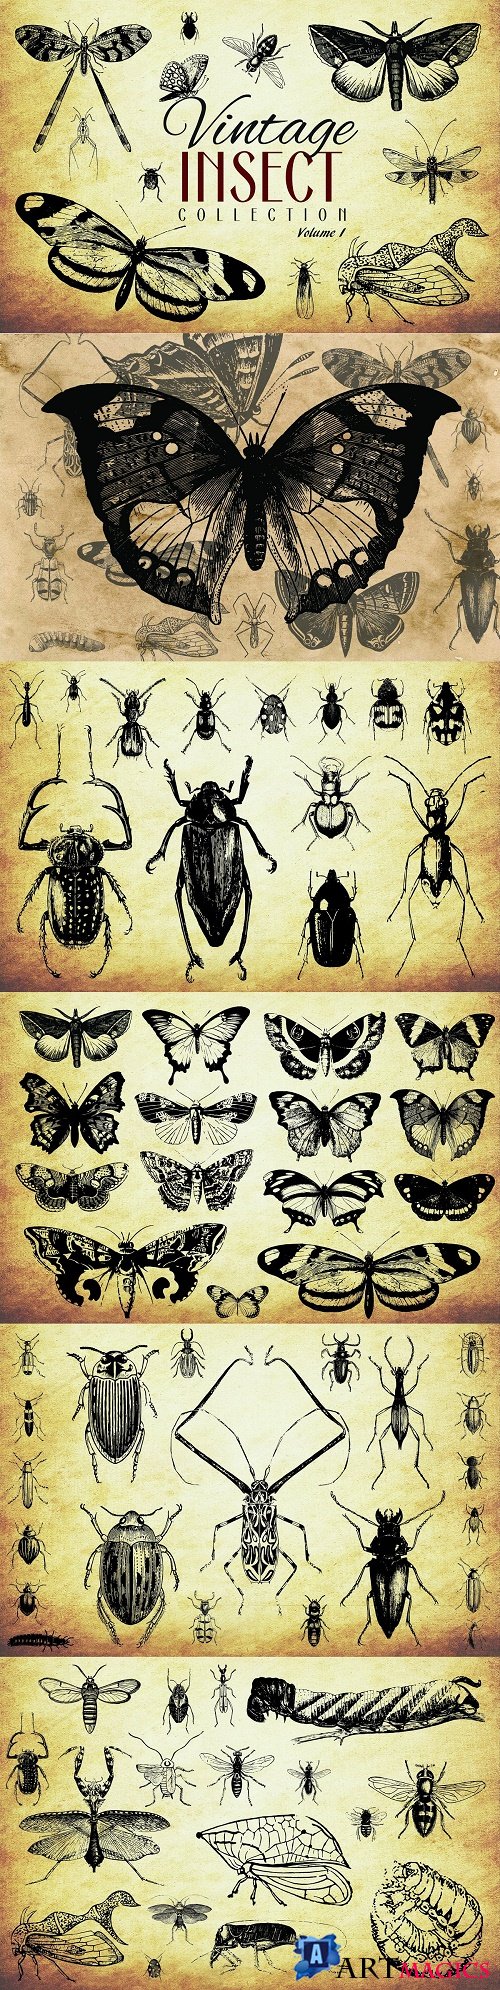 200 Vintage Insect Vector Graphics - 3450238